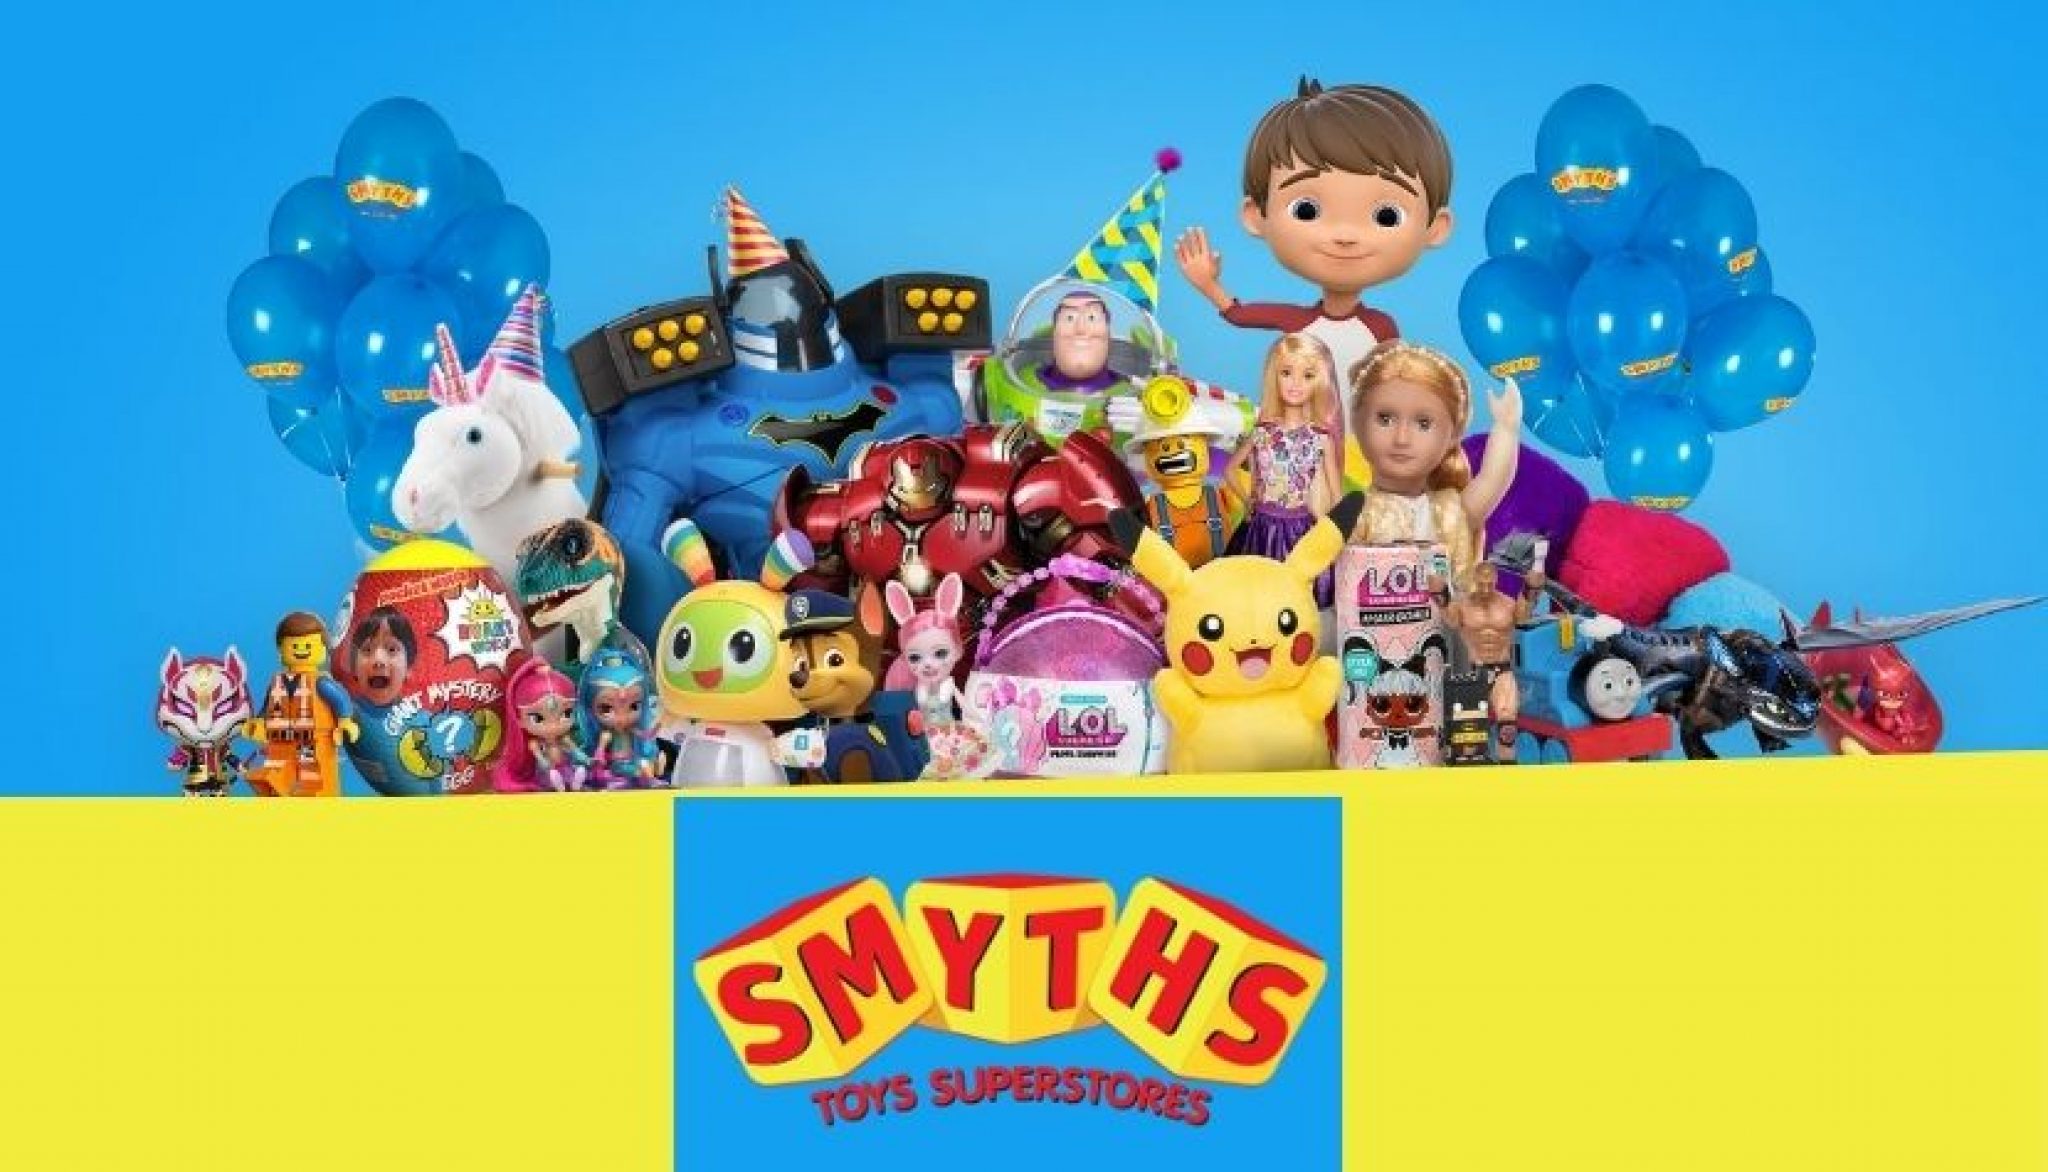 NHS Discounts at Smyths Toys - wide 2